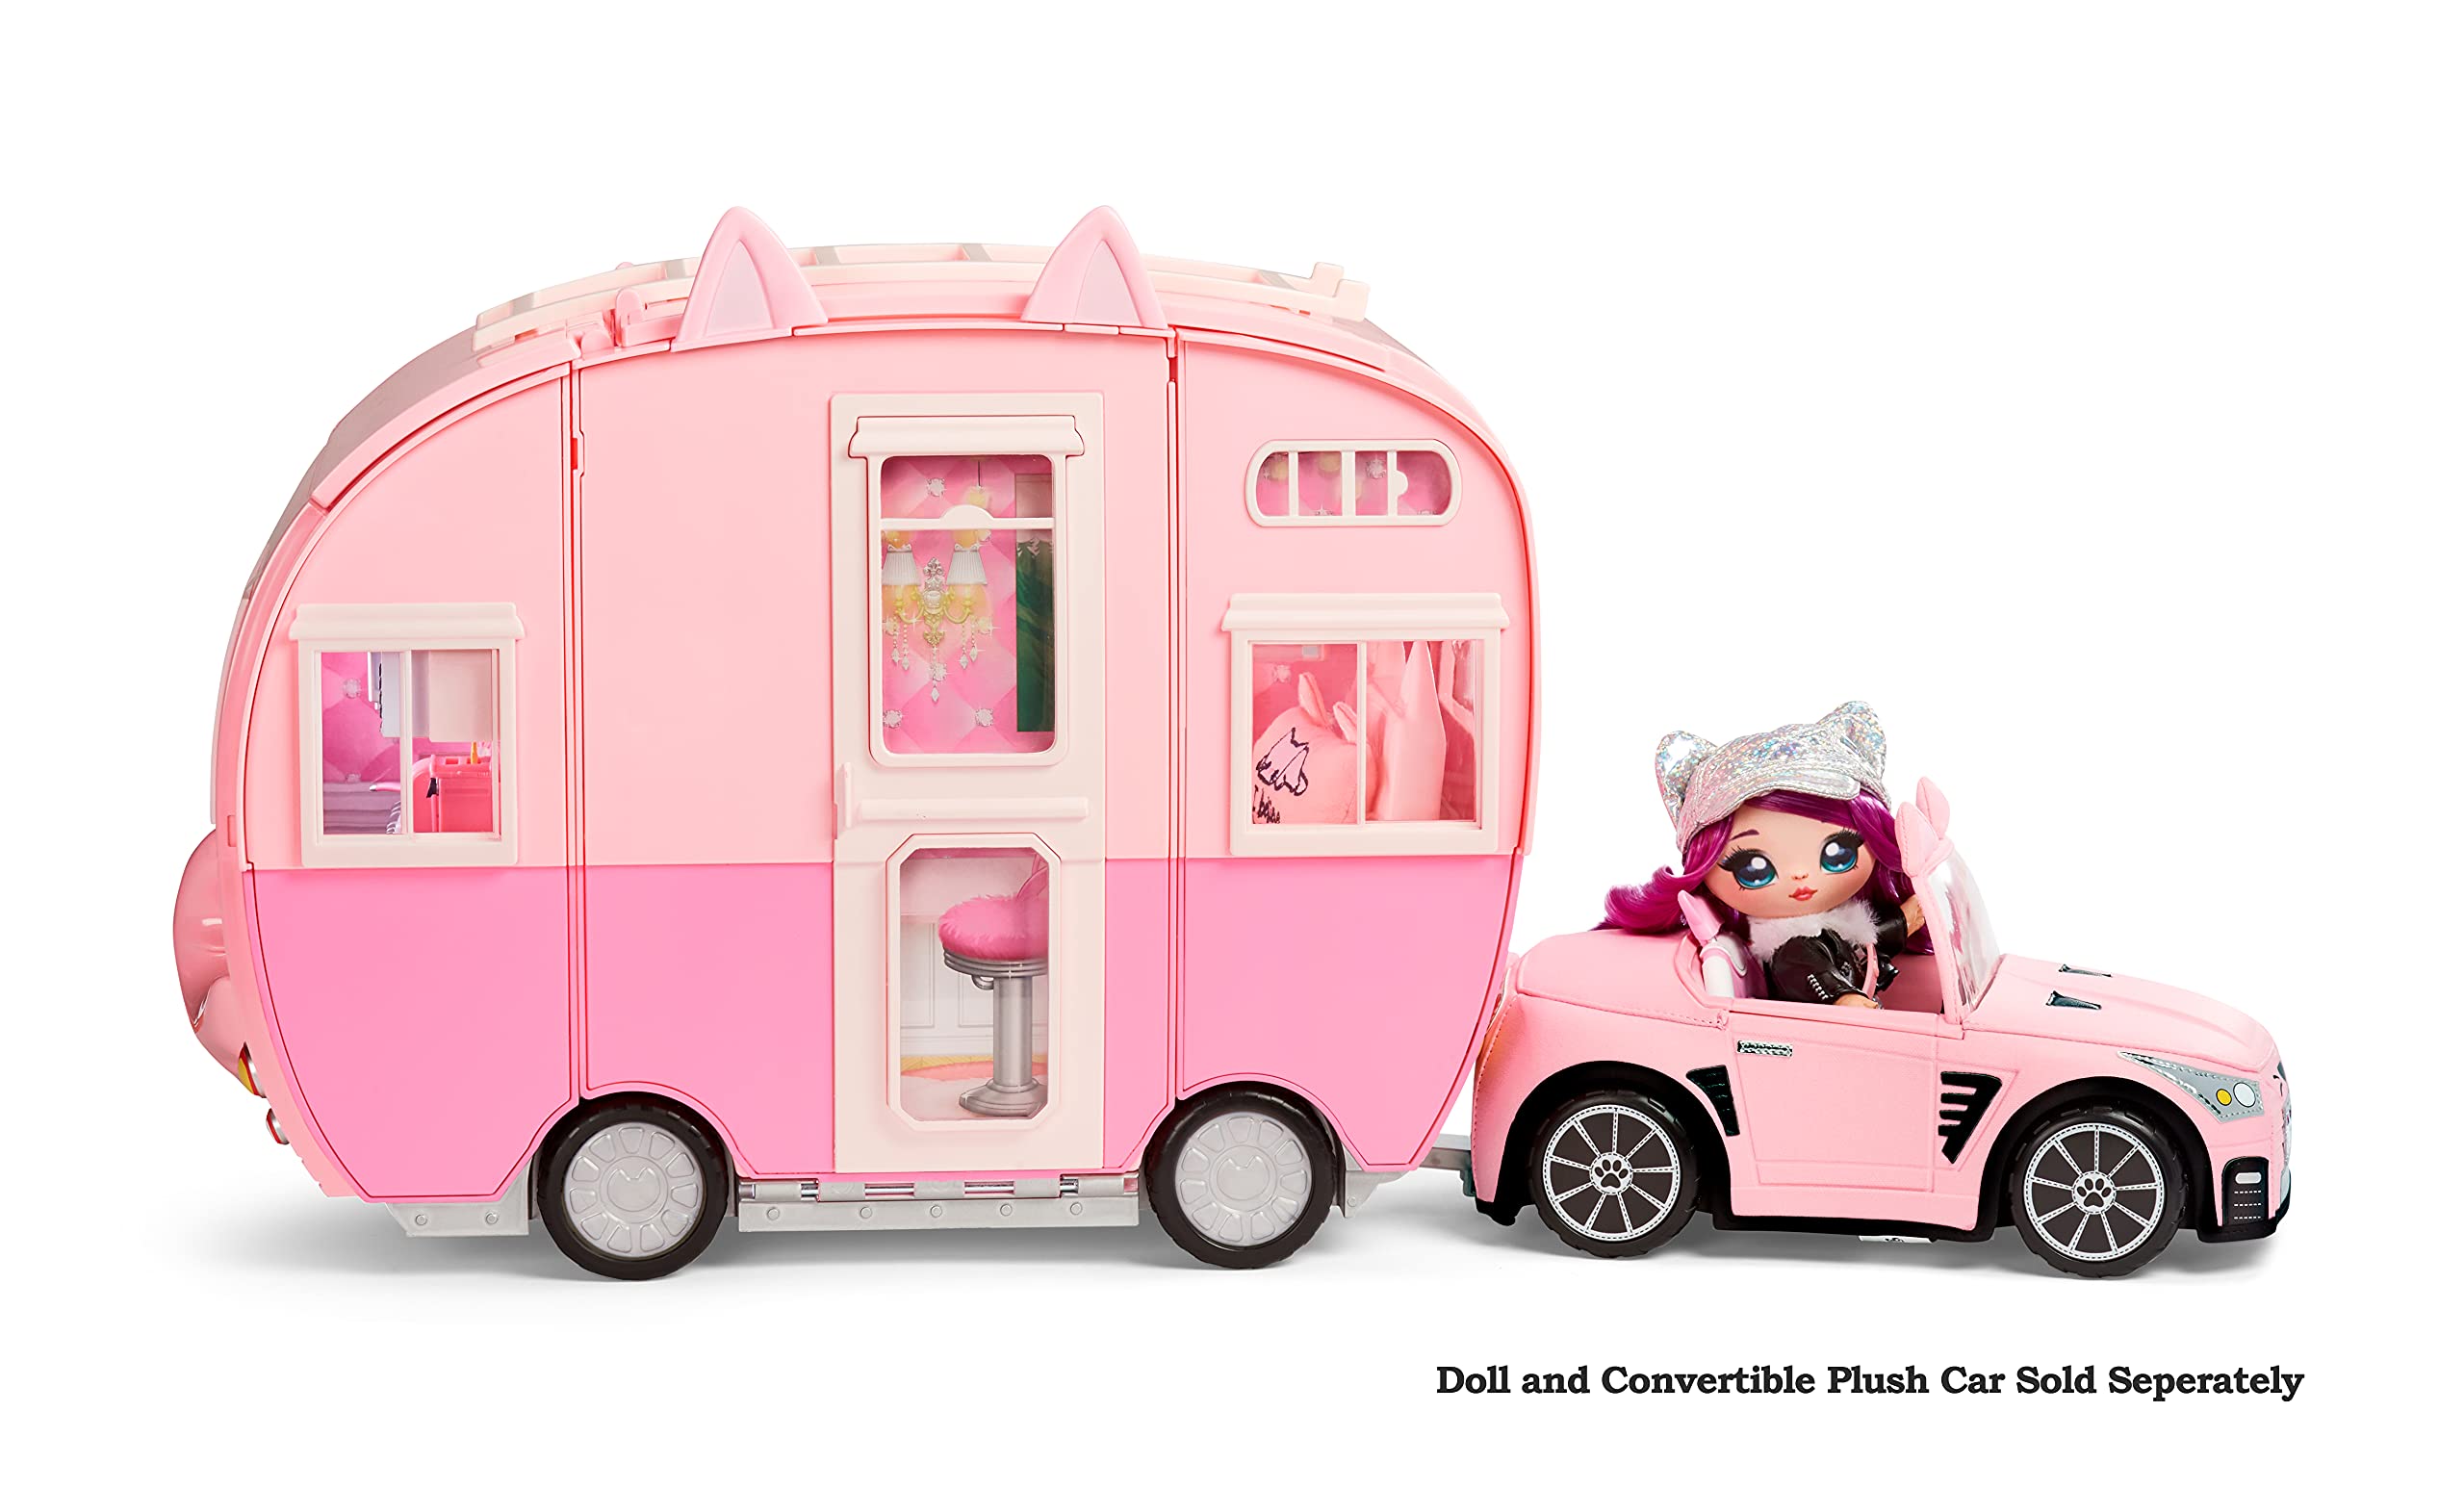 Na Na Na Surprise Kitty-Cat Camper Playset, Pink Toy Car Vehicle for Fashion Dolls with Cat Ears & Tail, Opens to 3 Feet Wide for 360 Play, 7 Play Areas, Accessories, Gift for Kids Ages 5 6 7 8+ Years - image 4 of 11